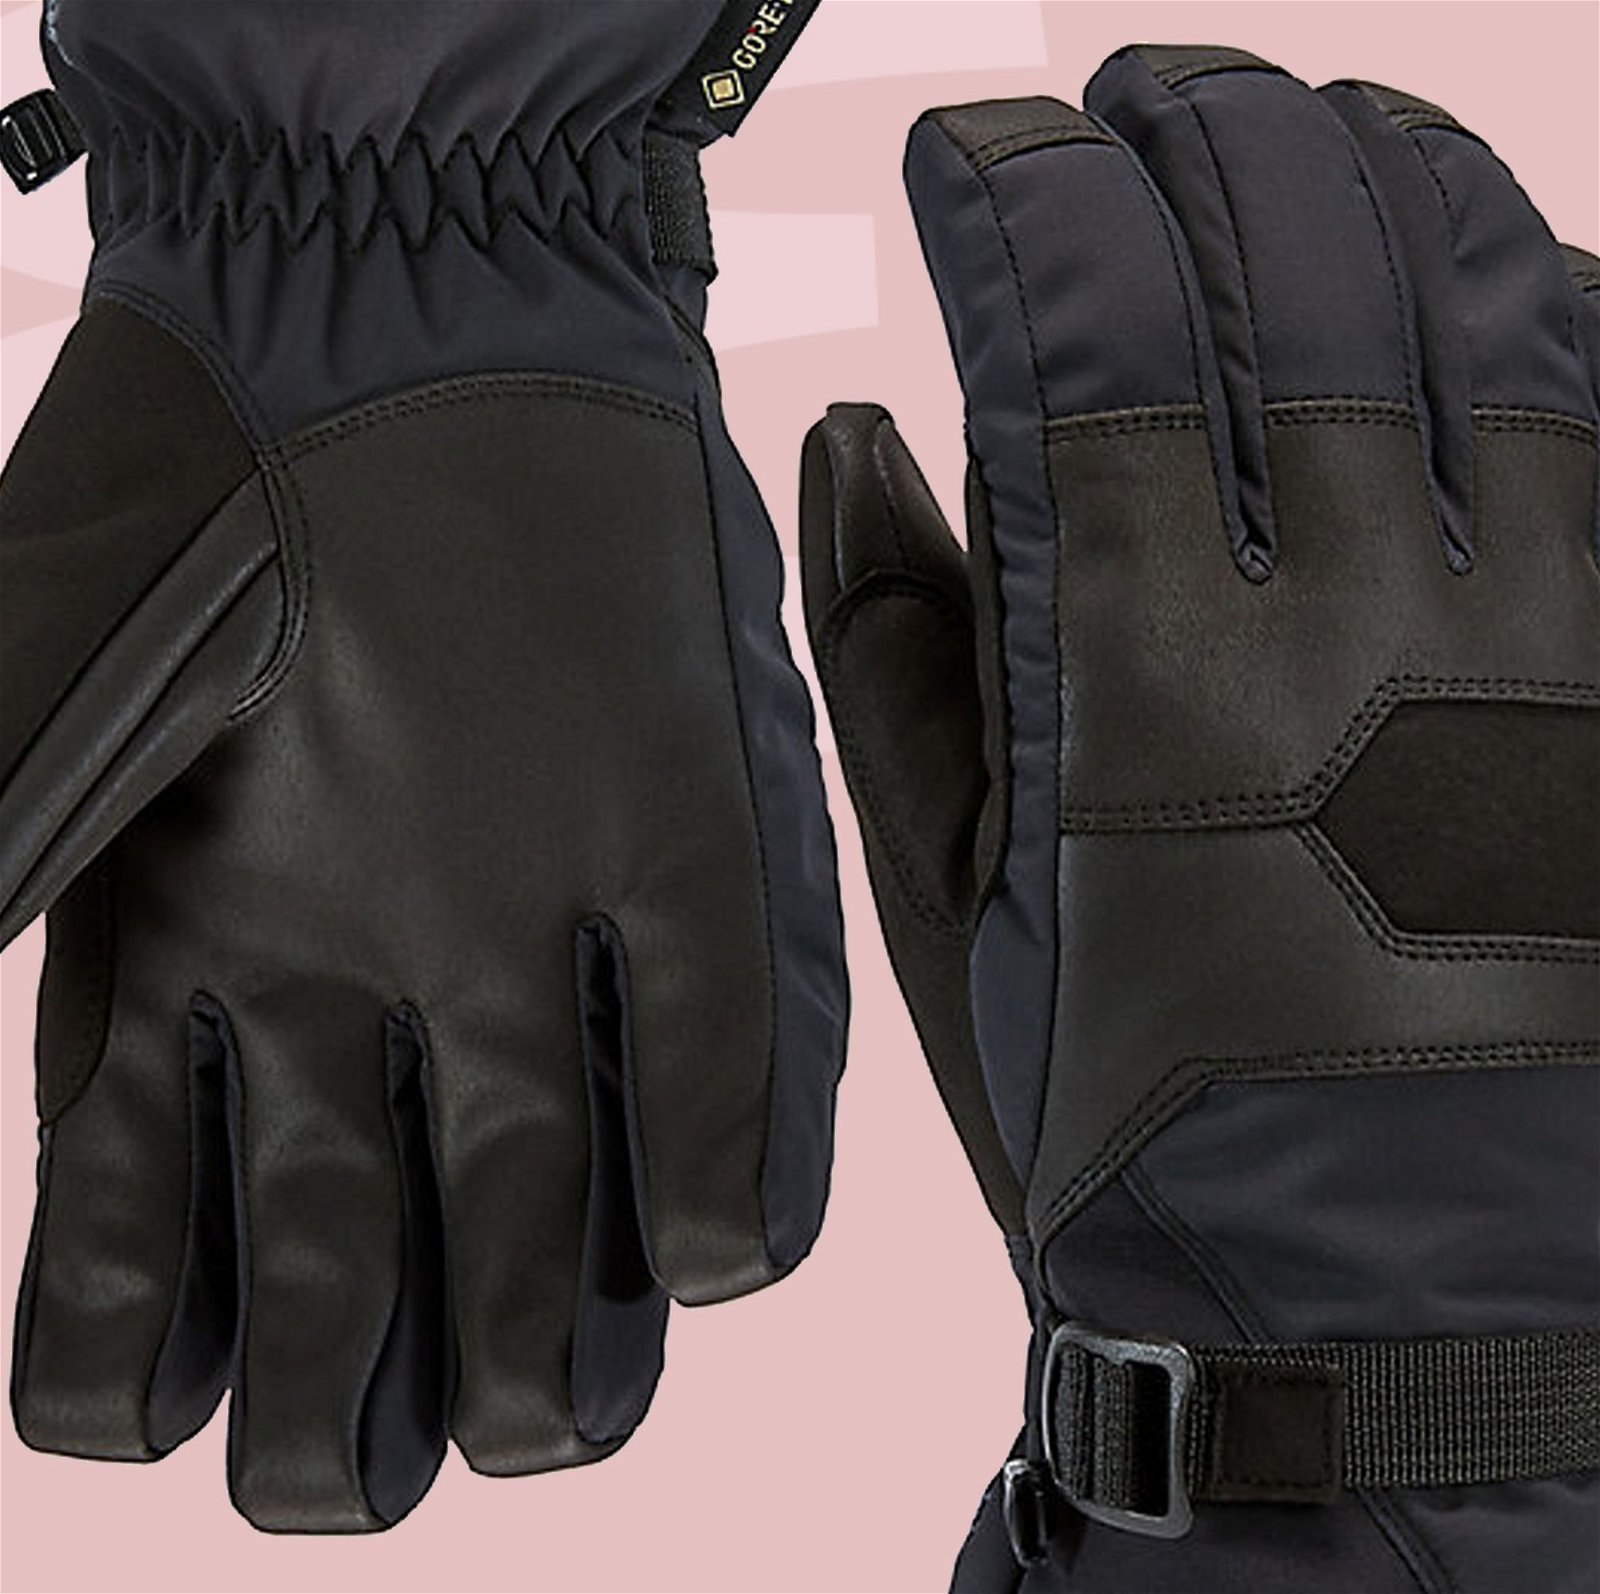 The 9 Best Heated Gloves For Keeping Warm